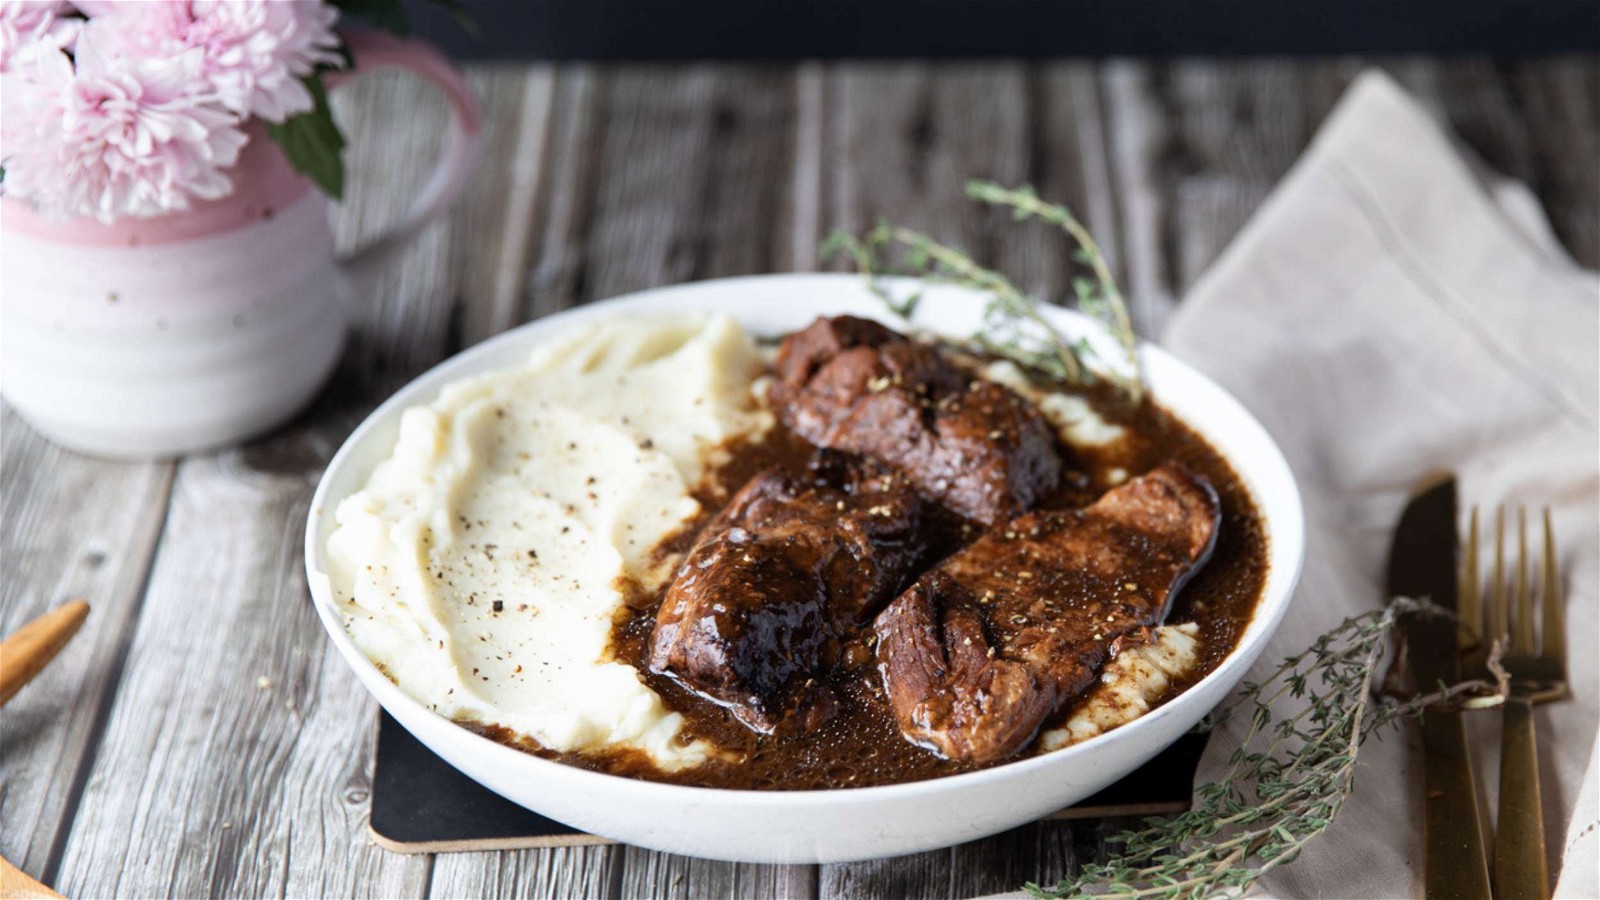 Image of Creamy Mashed Potatoes with Sealand Cooked Roast Beef in Gravy